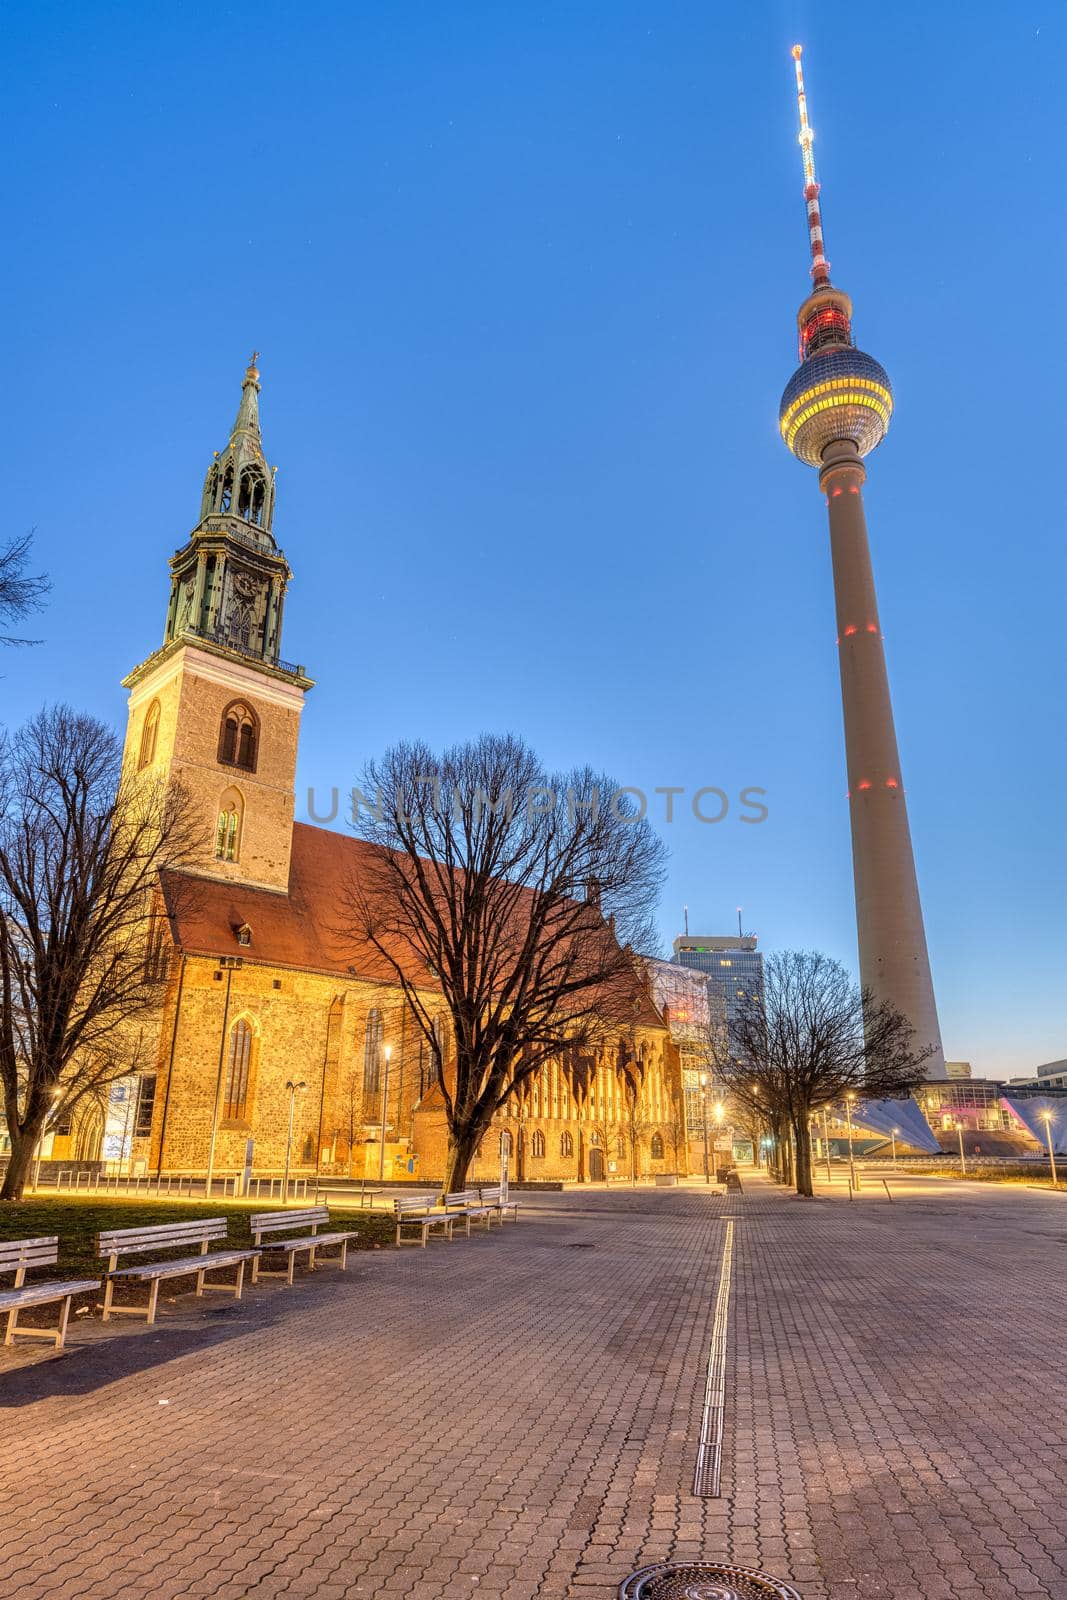 The famous TV Tower and the St. Mary's Church at the Alexanderplatz in Berlin at dawn